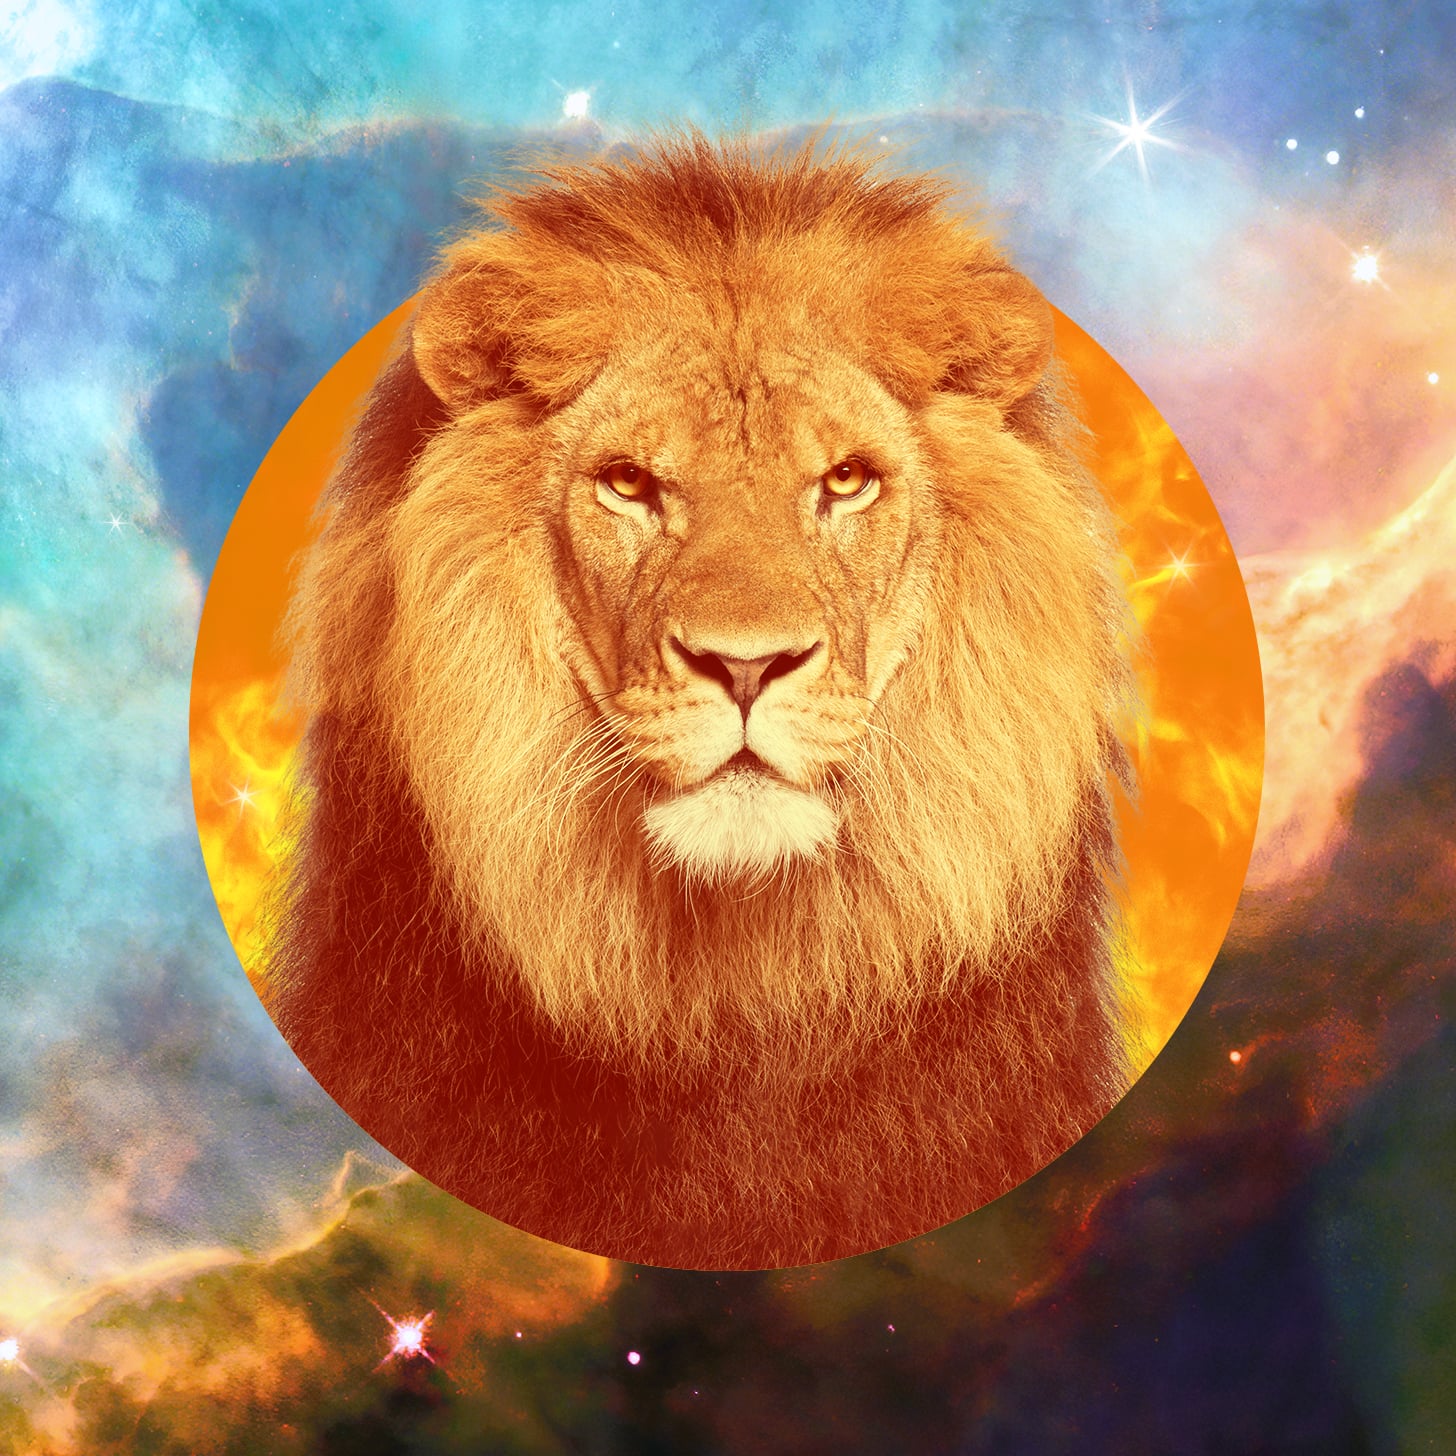 You will not have to look too long to spot a Leo rising. Their